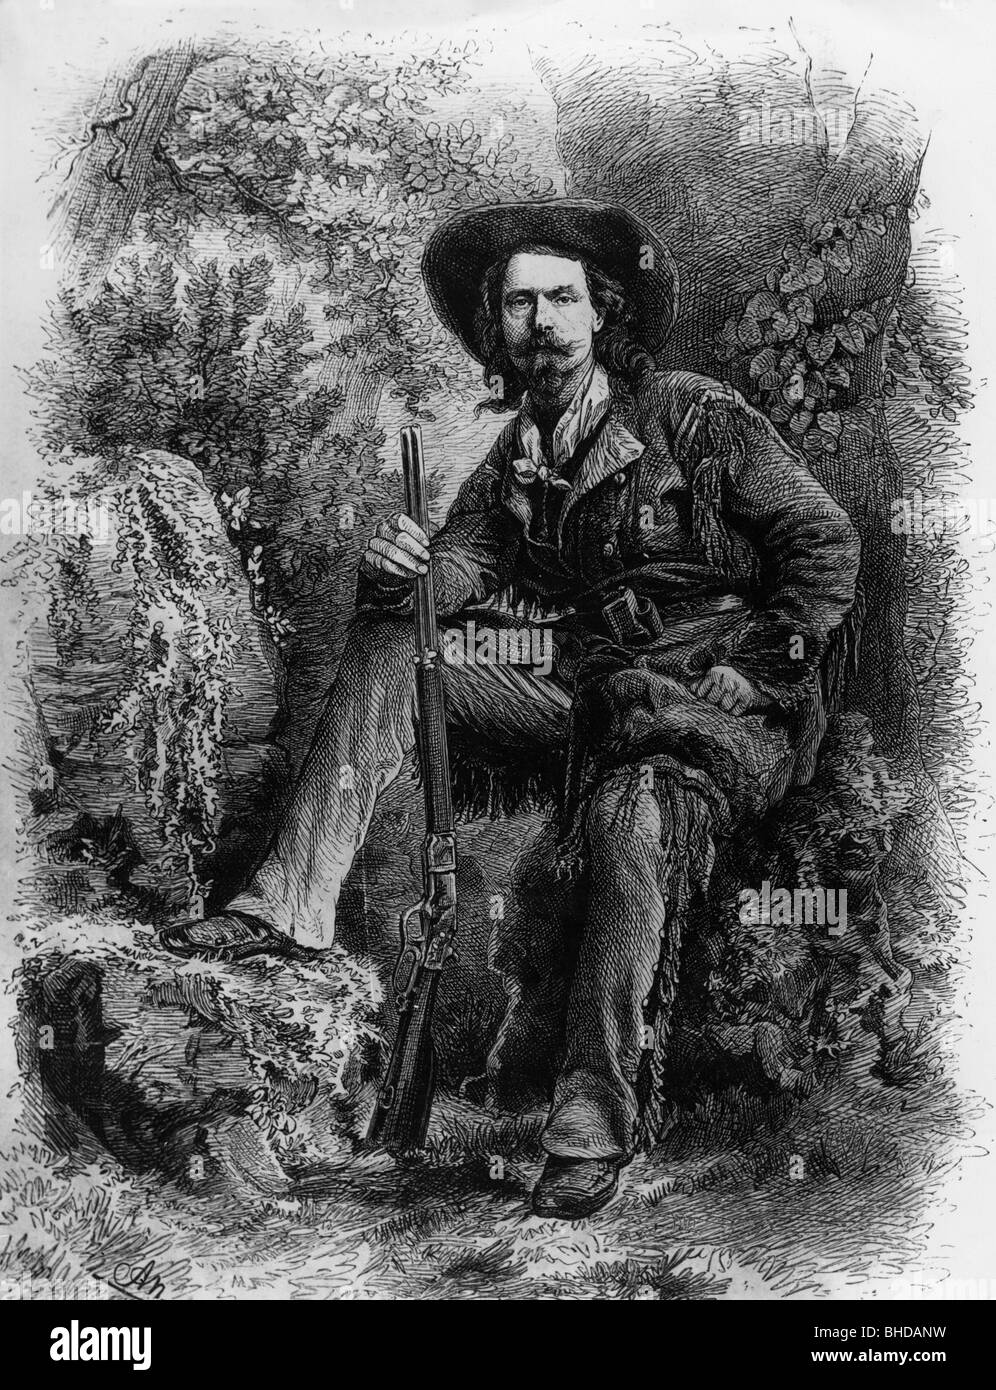 Cody, William Federick, 26.2.1846 - 10.1.1917, US soldier, bison hunter, after photgraph, wood engraving by Adolf Neumann (1825 - 1884), 1877, Stock Photo